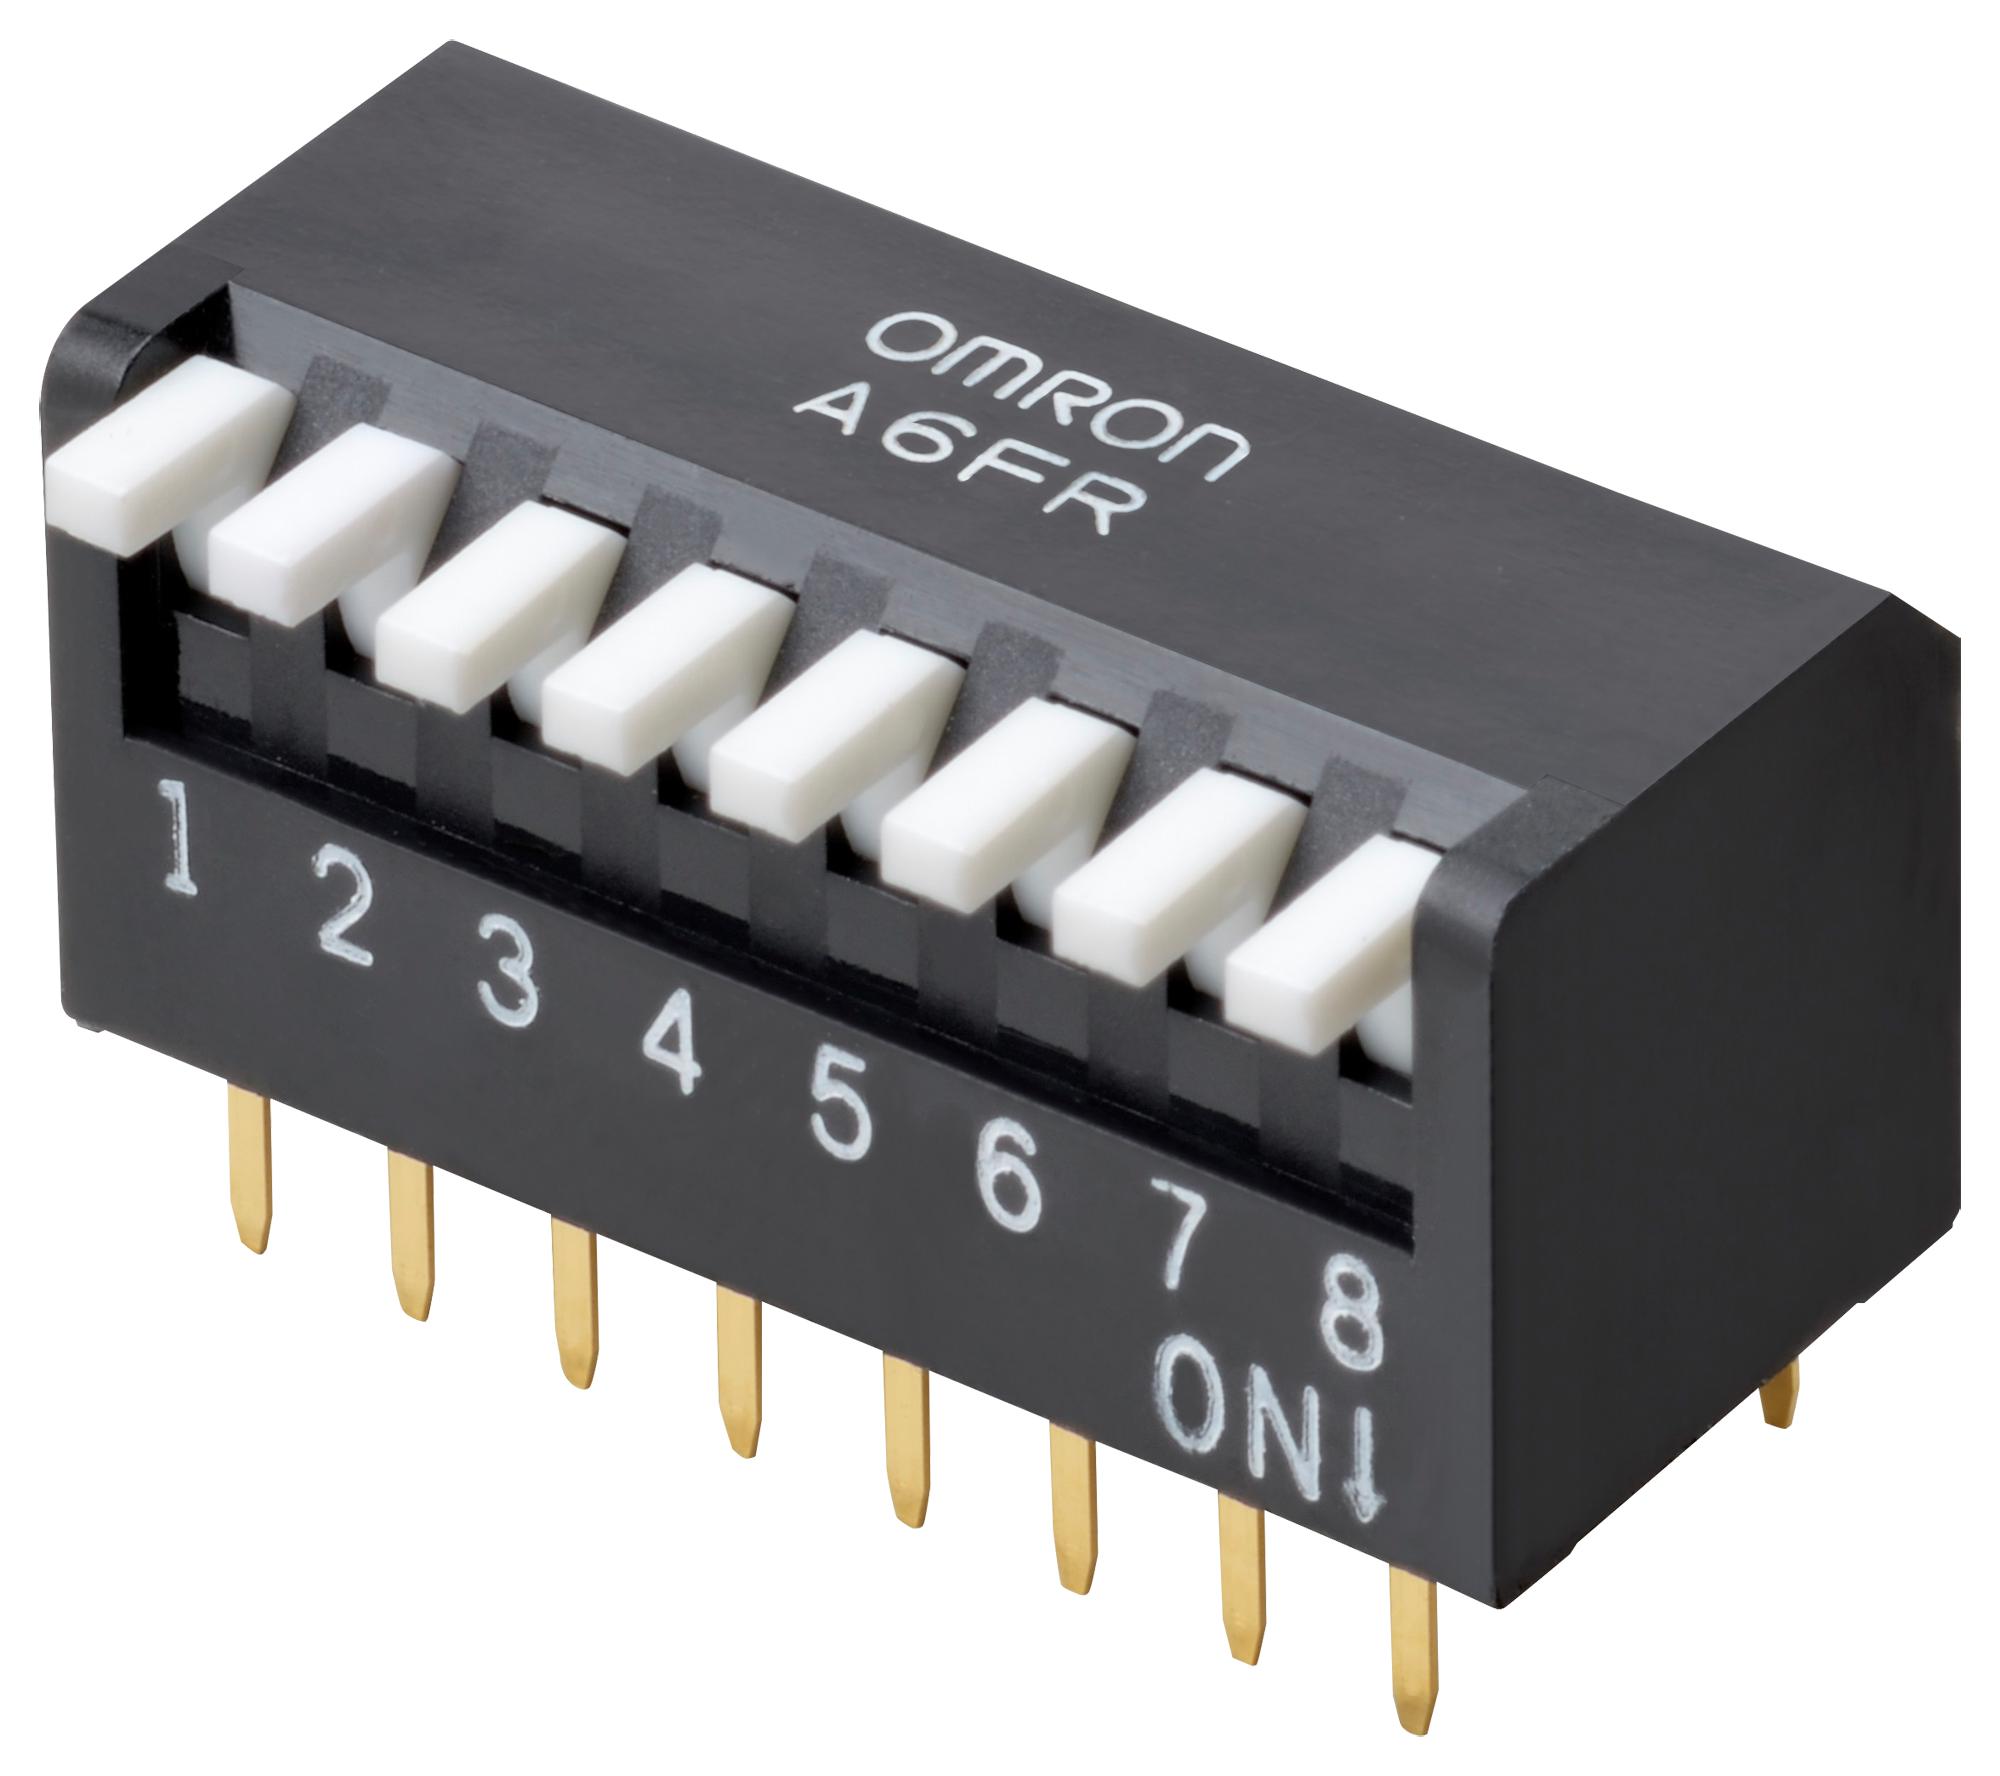 A6FR-2104 DIP SWITCH, 2POS, SPST, PIANO KEY, TH OMRON